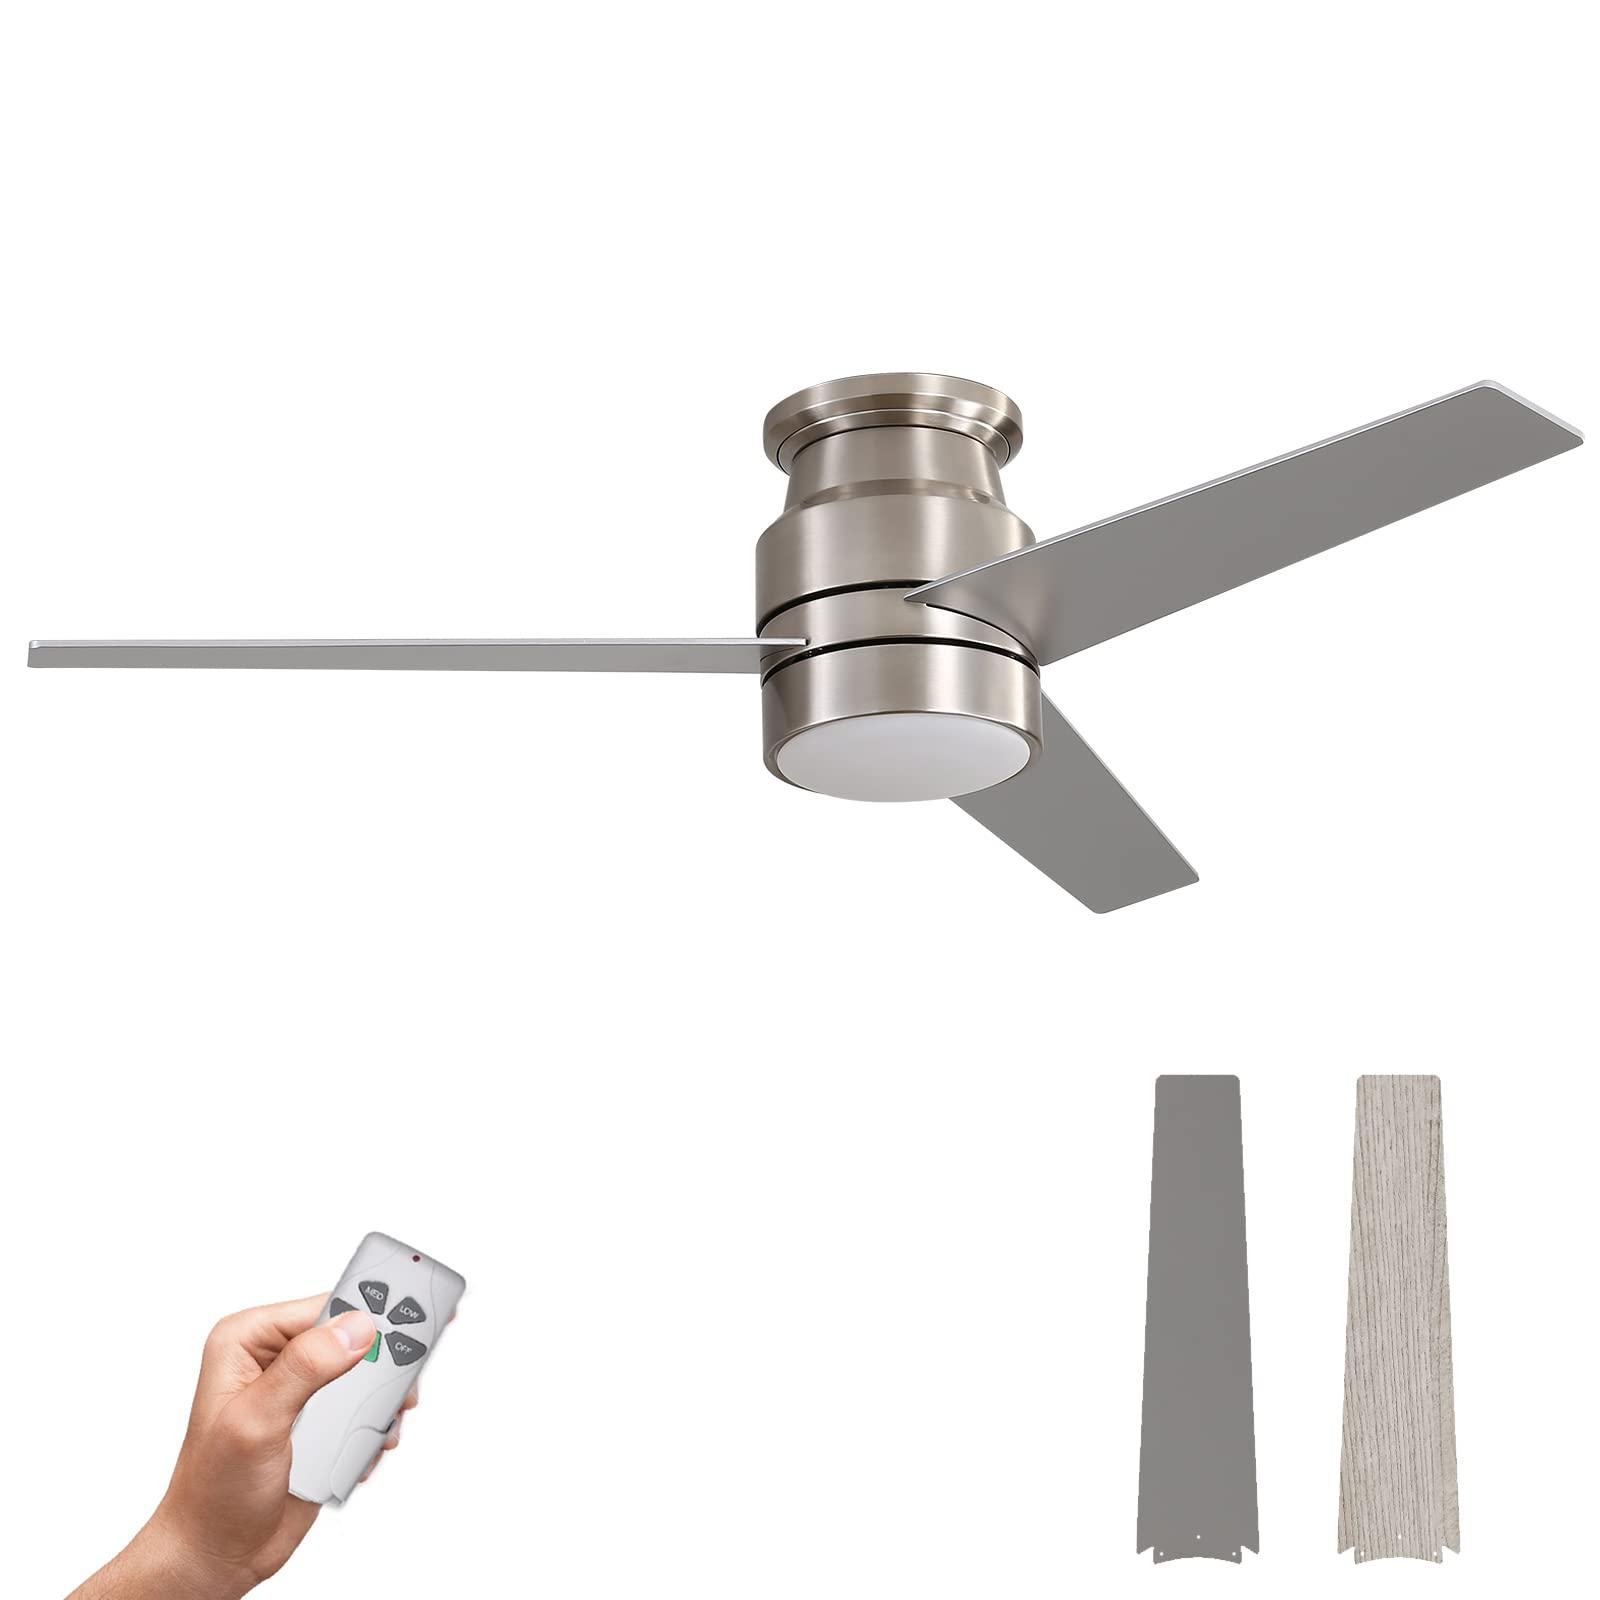 warmiplanet flush mount ceiling fan with lights remote control, 52-inch, brushed nickel(3-blades)